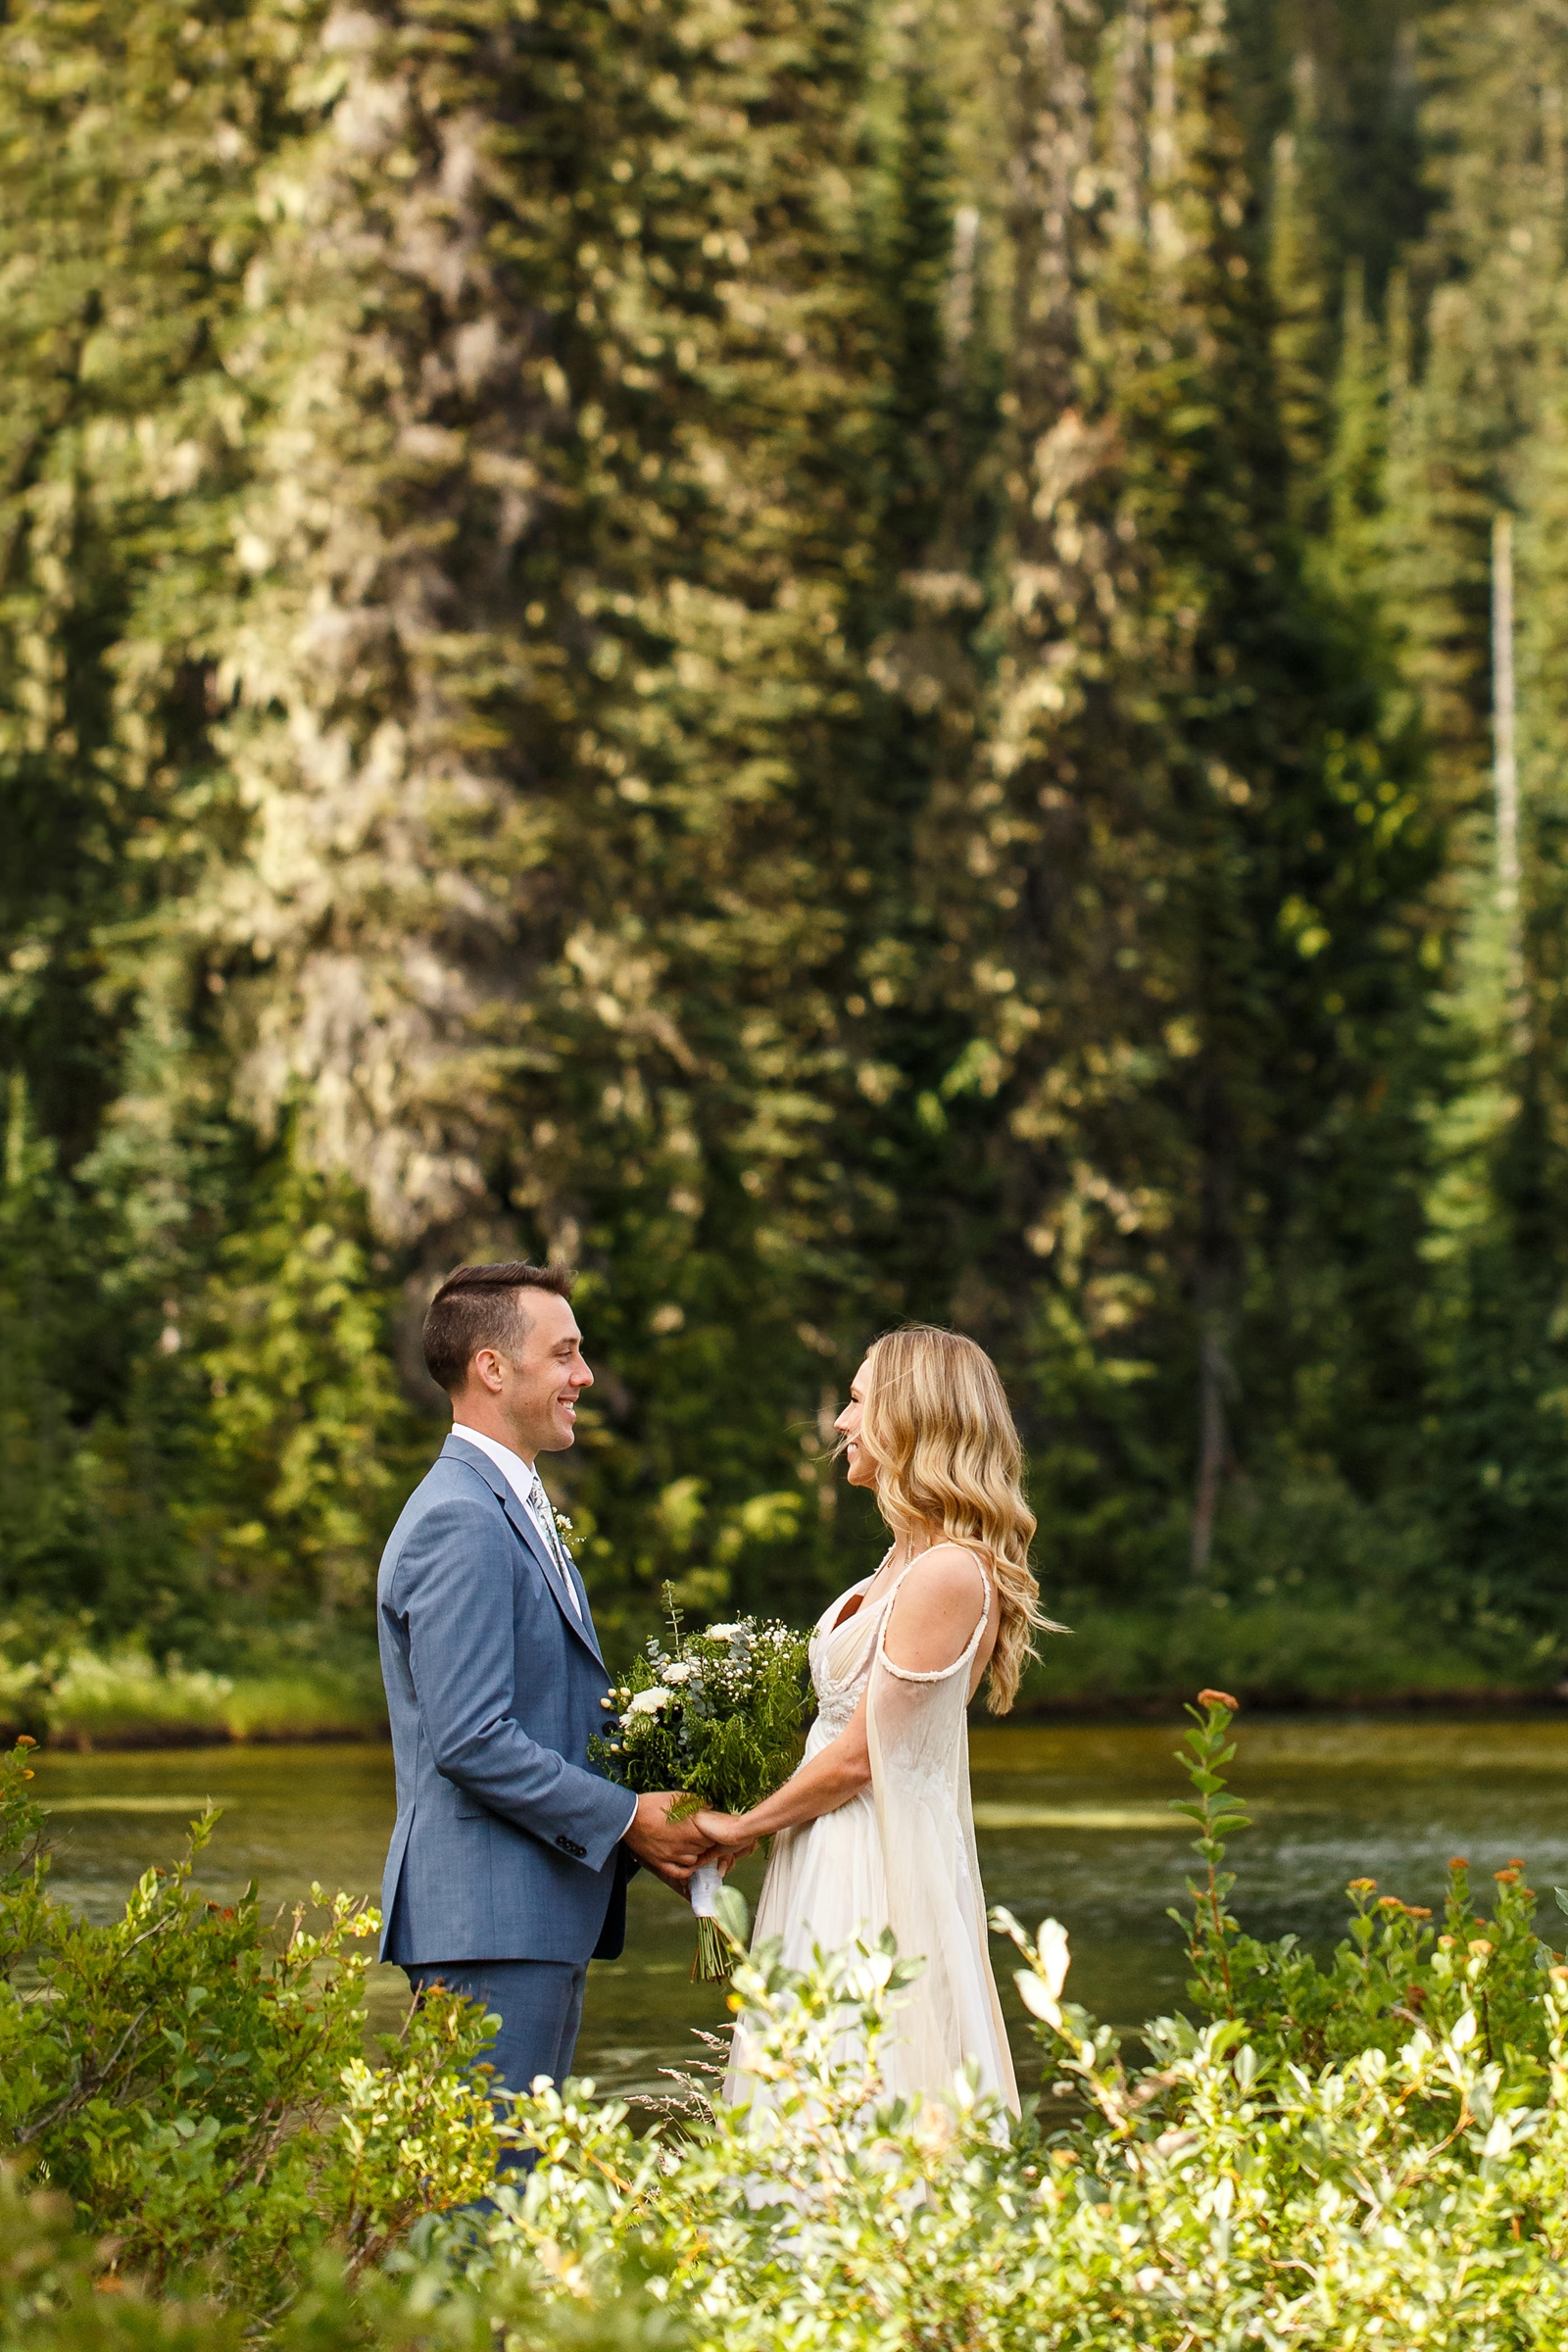 This couple had an epic elopement in Mount Rainier National Park